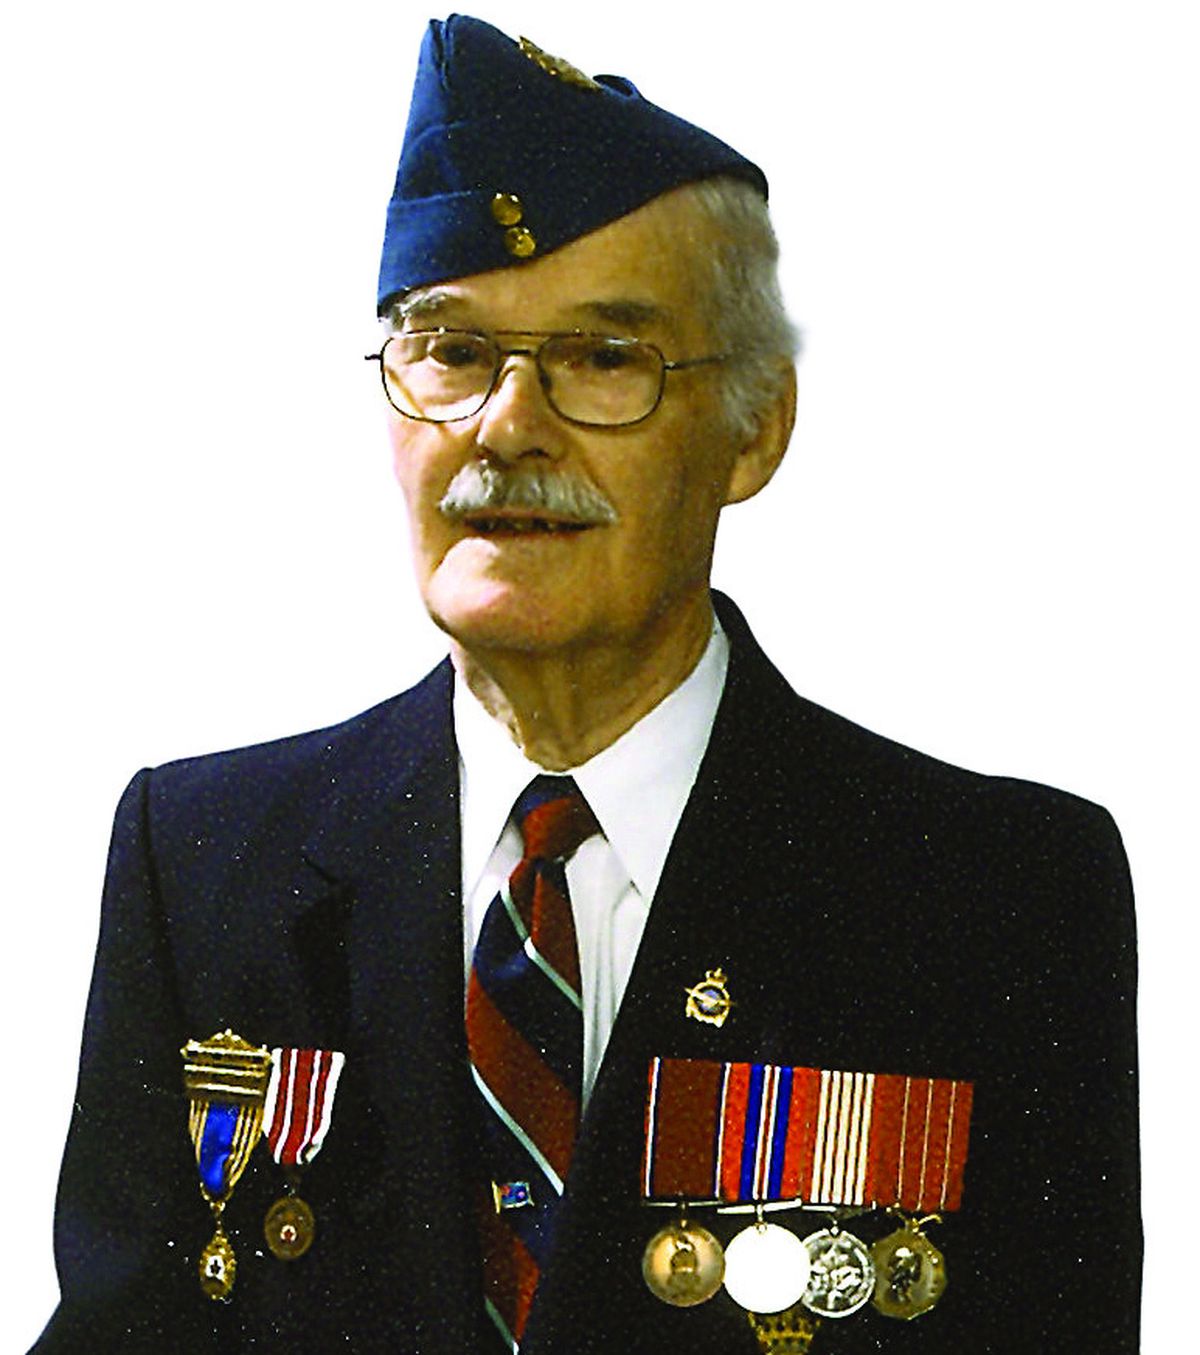 Carter, in this May 2012 photo, poses in his Royal Air Forces Association uniform. The British organization supports and cares for retired members of the air force.